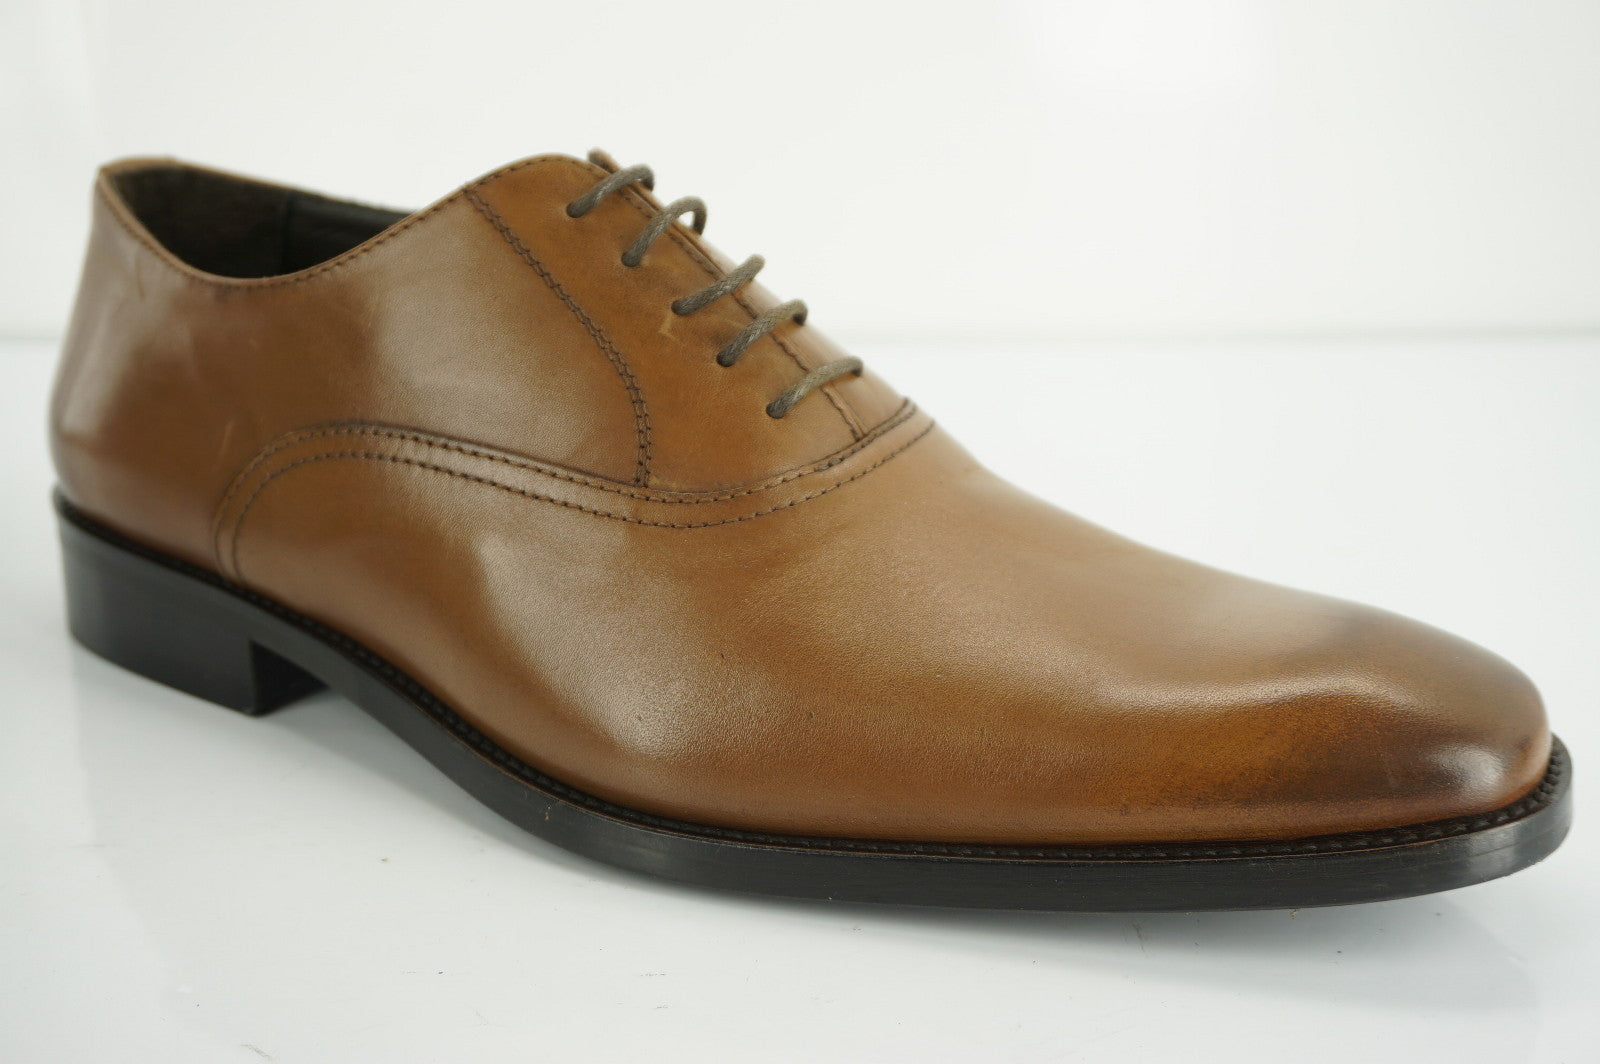 To Boot New York Gallagher Leather Plain Toe Derby Oxfords SZ 11 lace up $350